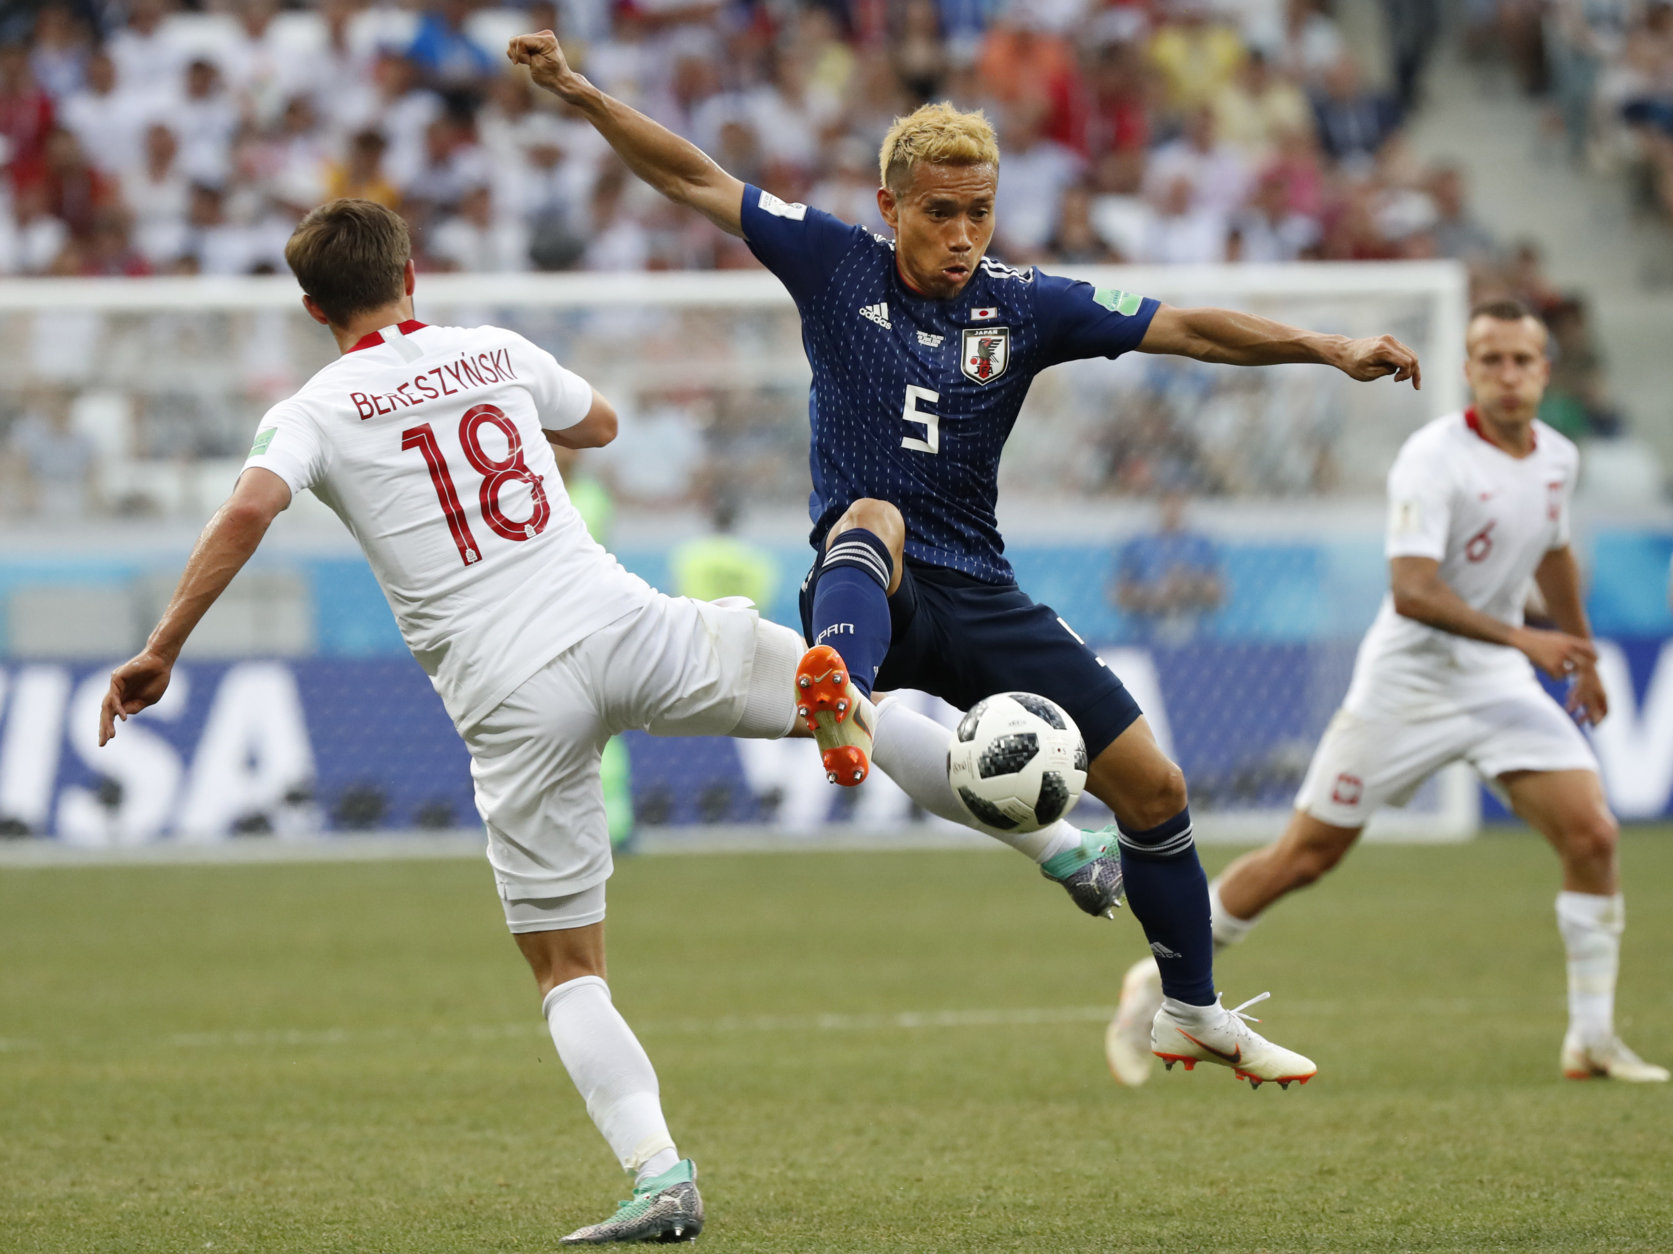 Japan's Yuto Nagatomo, center, and Poland's Bartosz Bereszynski vie for the ball during the group H match between Japan and Poland at the 2018 soccer World Cup at the Volgograd Arena in Volgograd, Russia, Thursday, June 28, 2018. (AP Photo/Eugene Hoshiko)